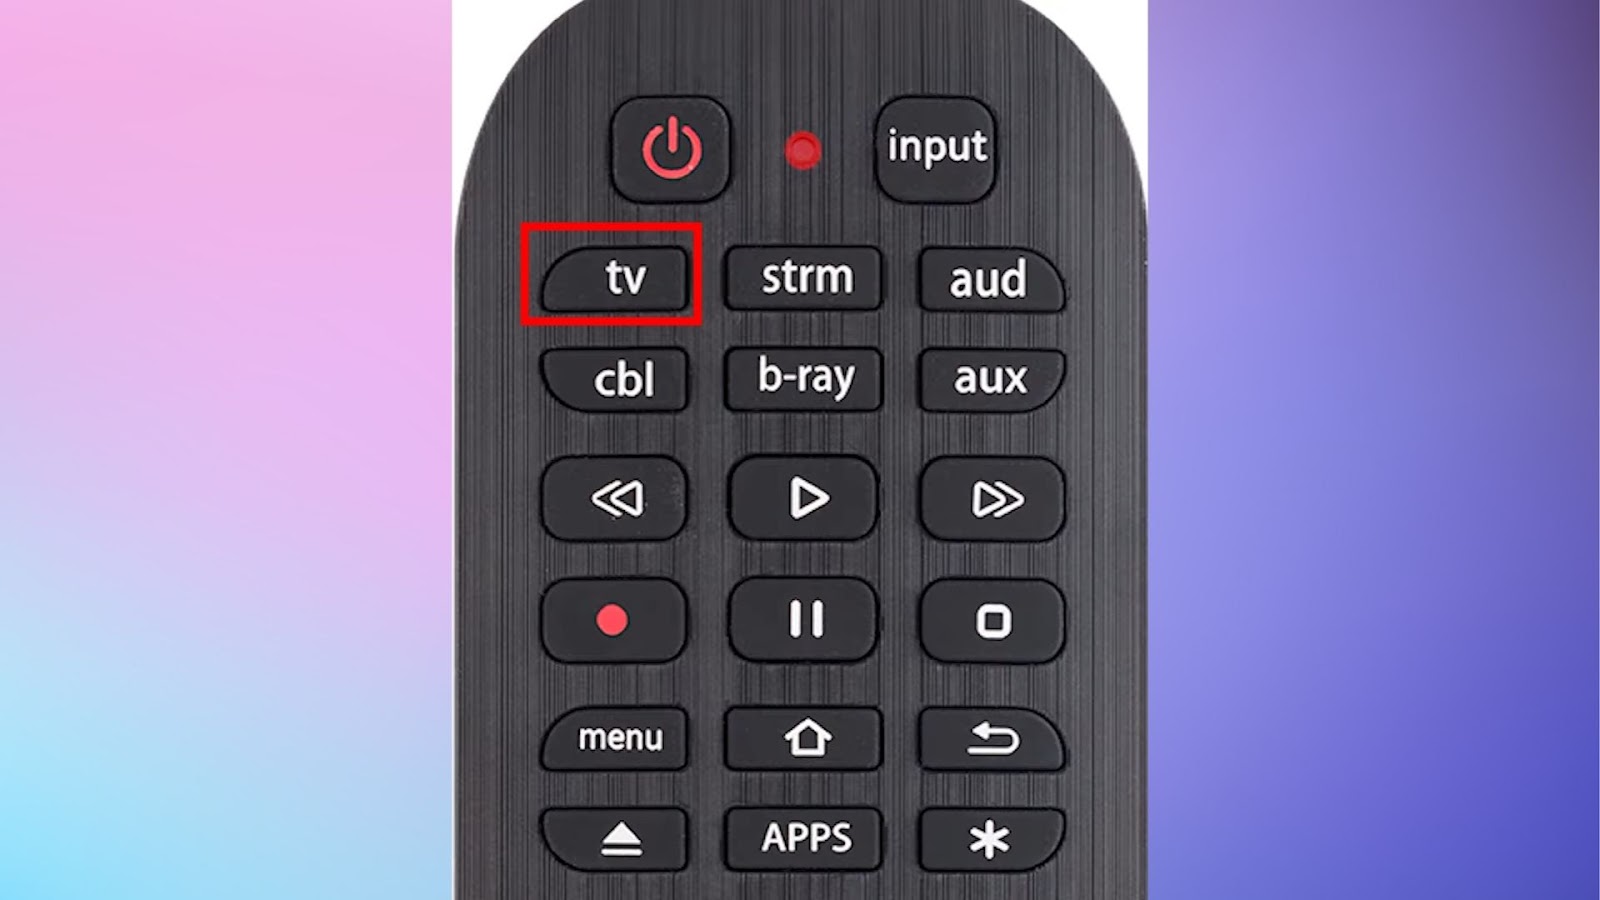 Store the 4-digit Code on Your Remote